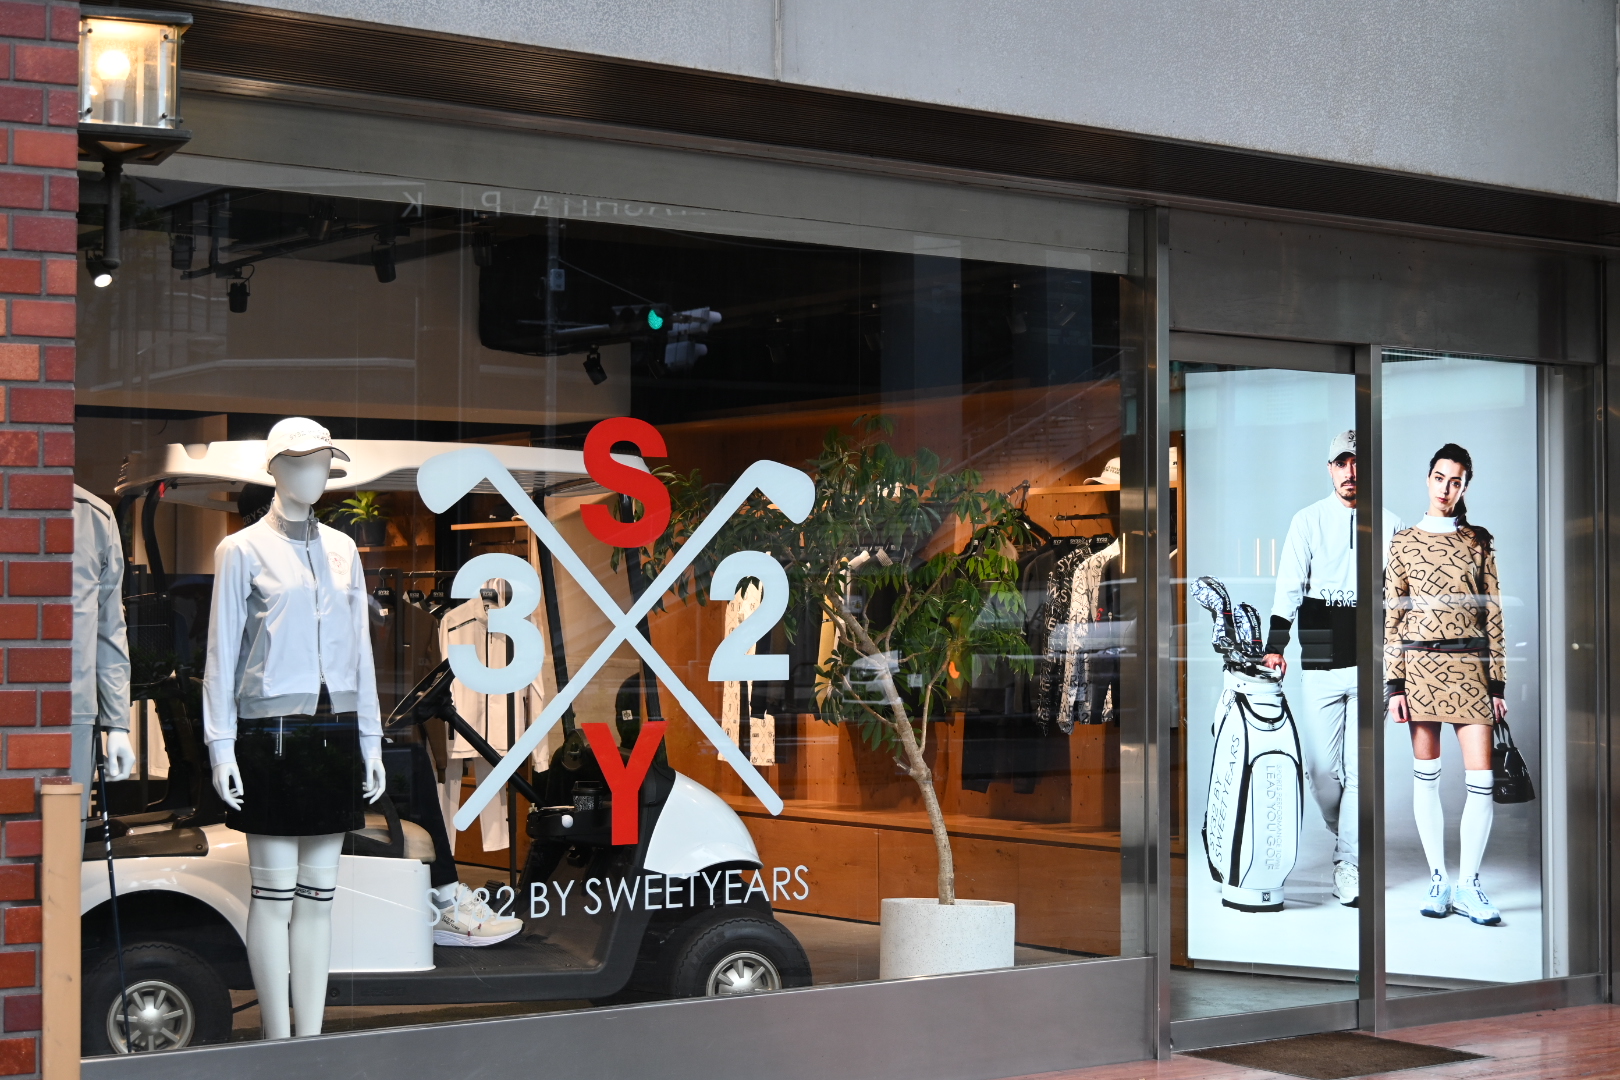 SY32 by SWEET YEARS GOLF LIMITED STORE “SHIBUYA”